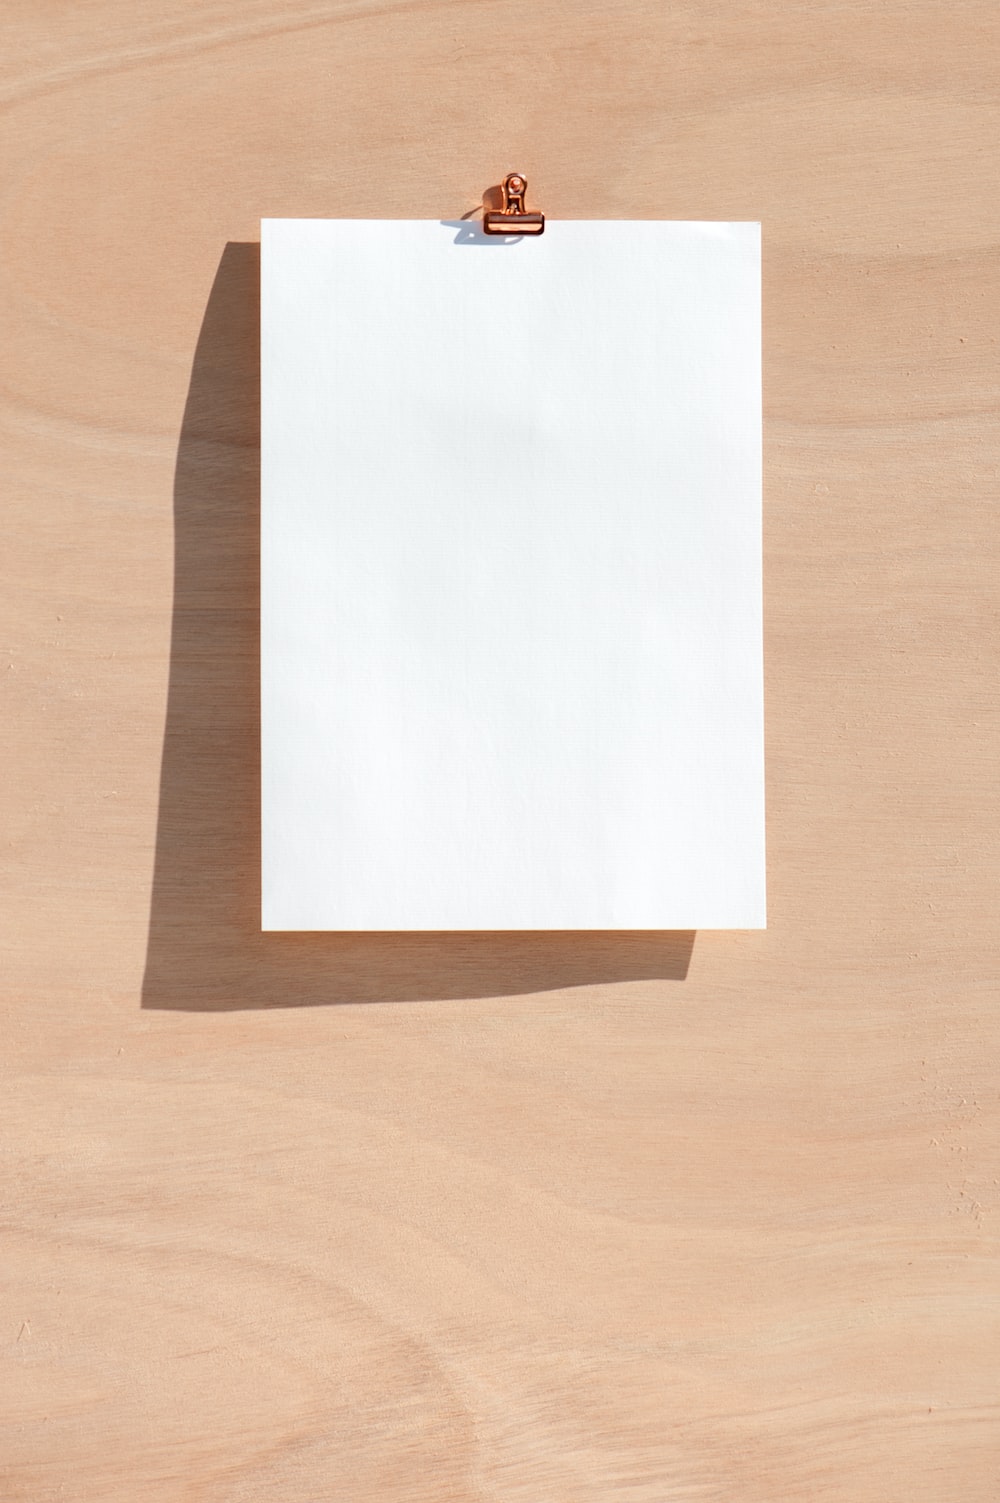 What are the 4 standard paper sizes?